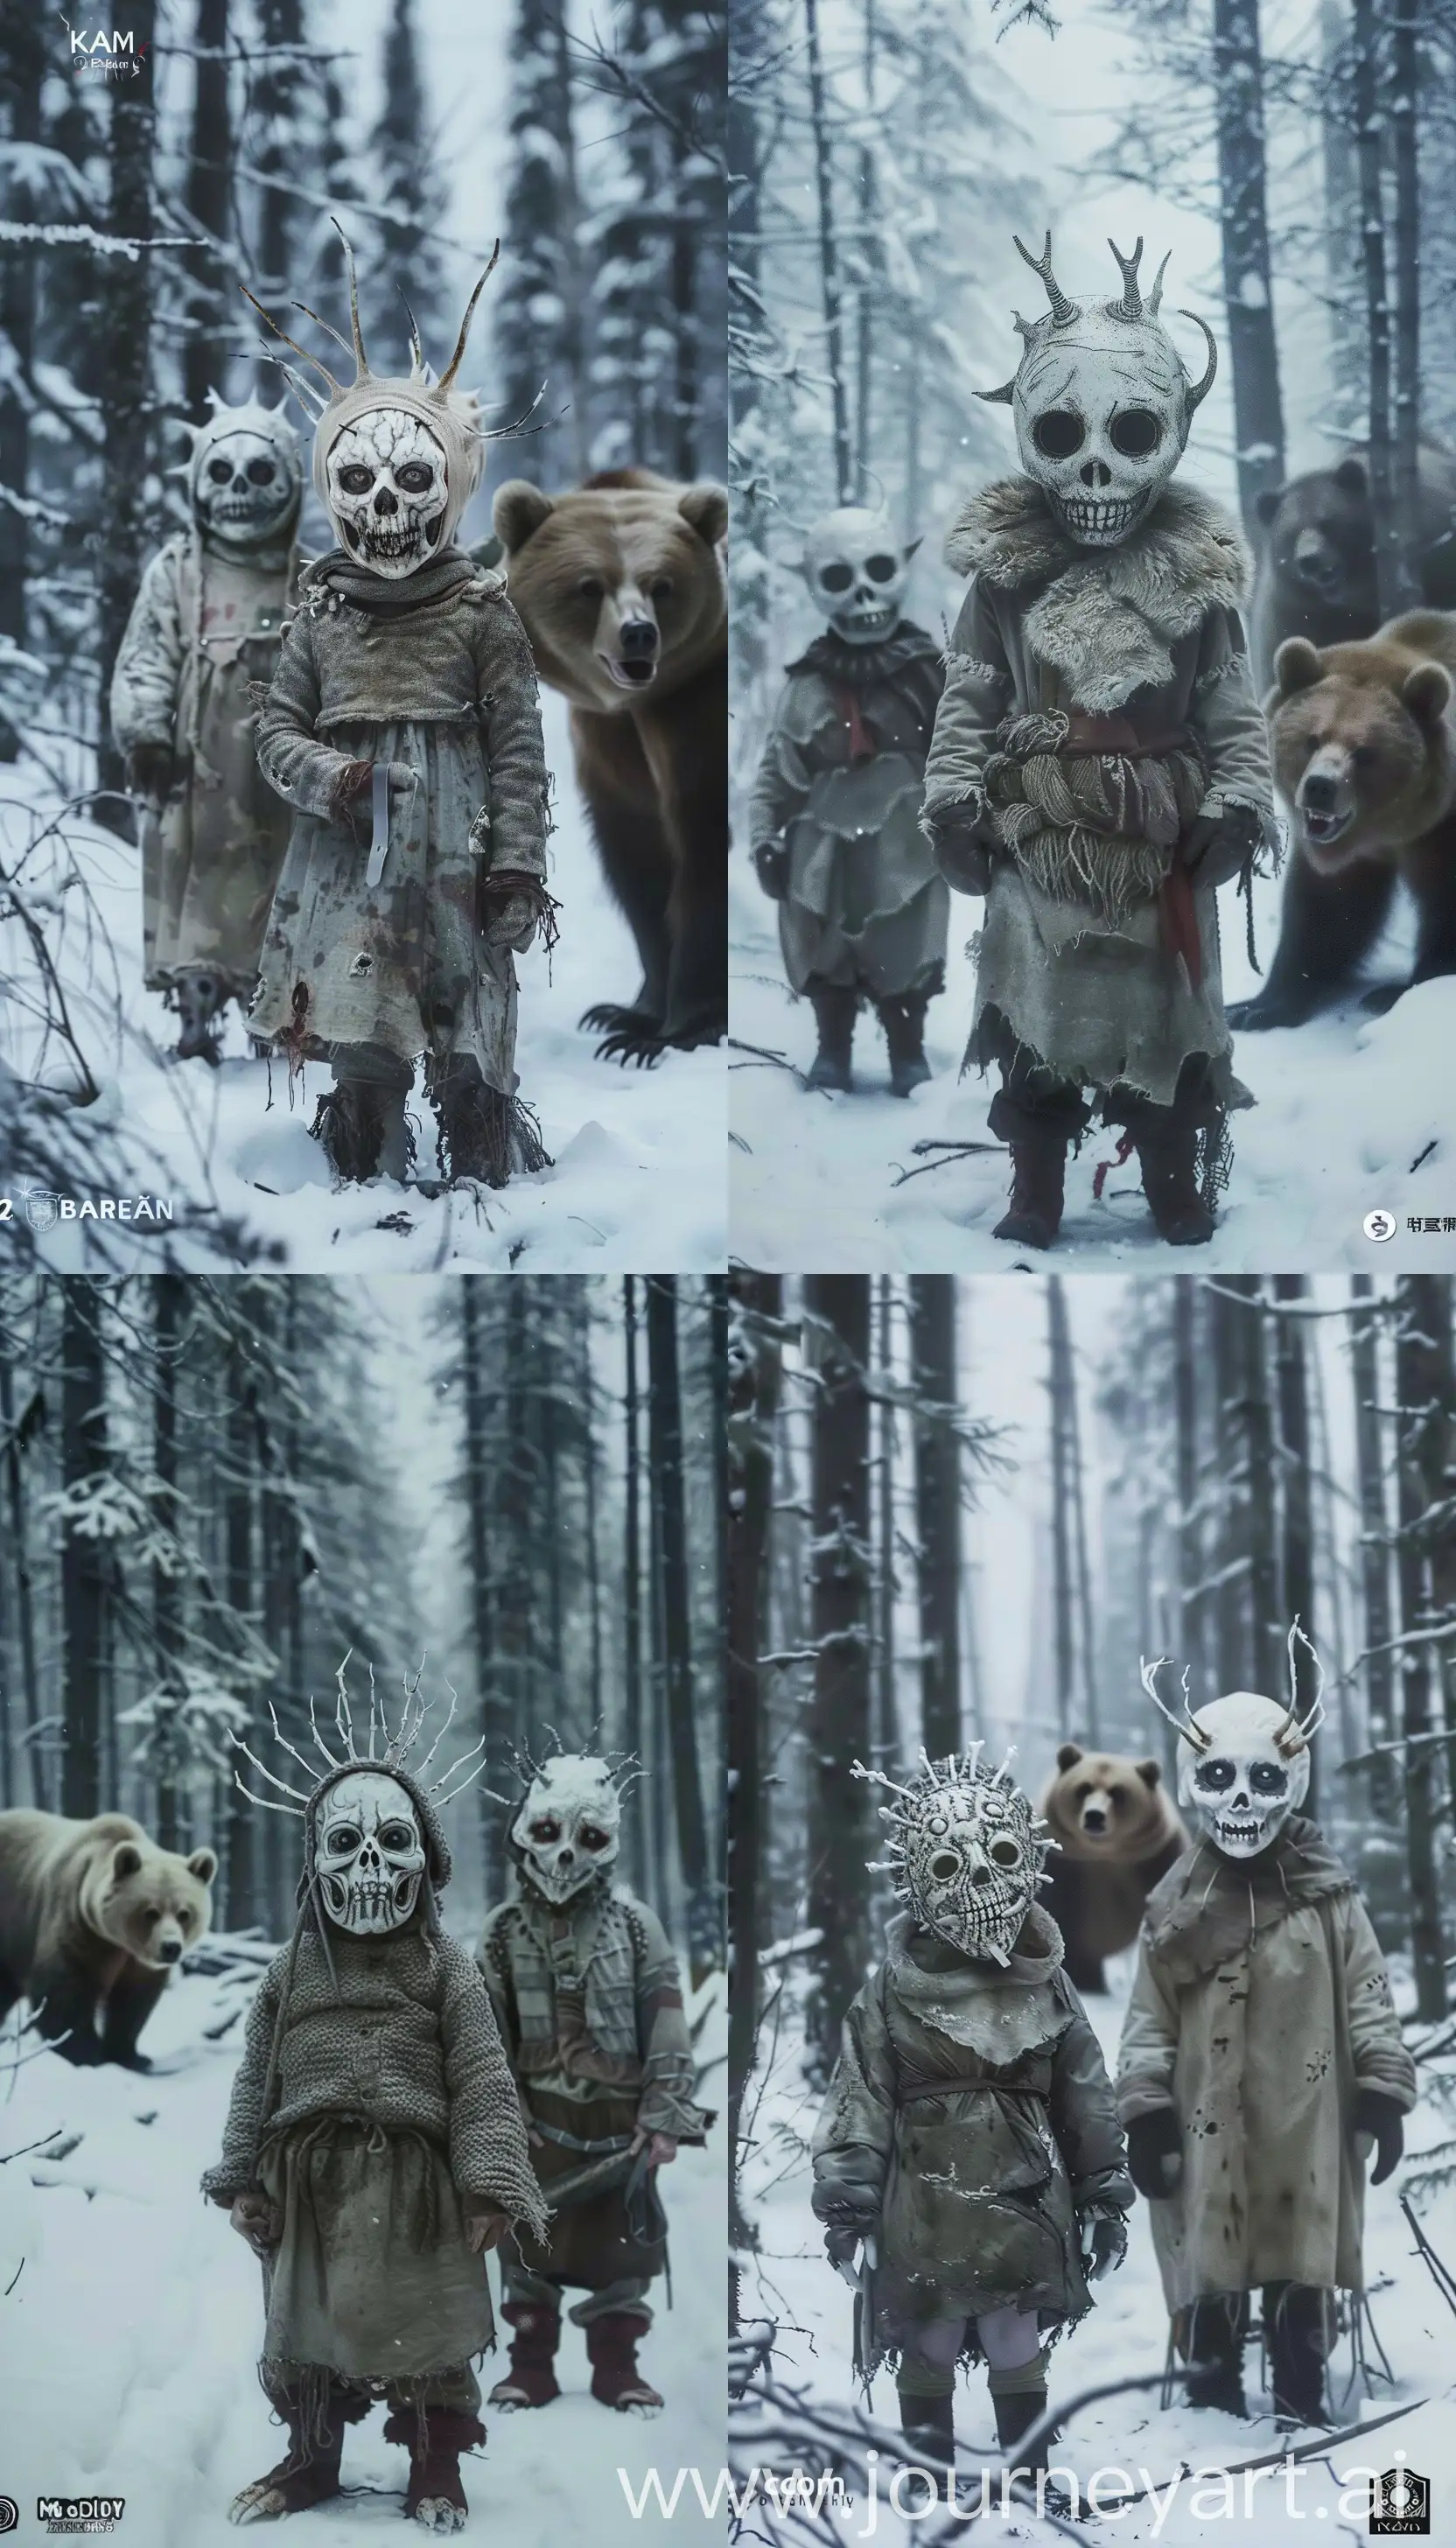 Terrifying-Deformed-Children-with-Masks-and-Bears-in-Snowy-Alaskan-Forest